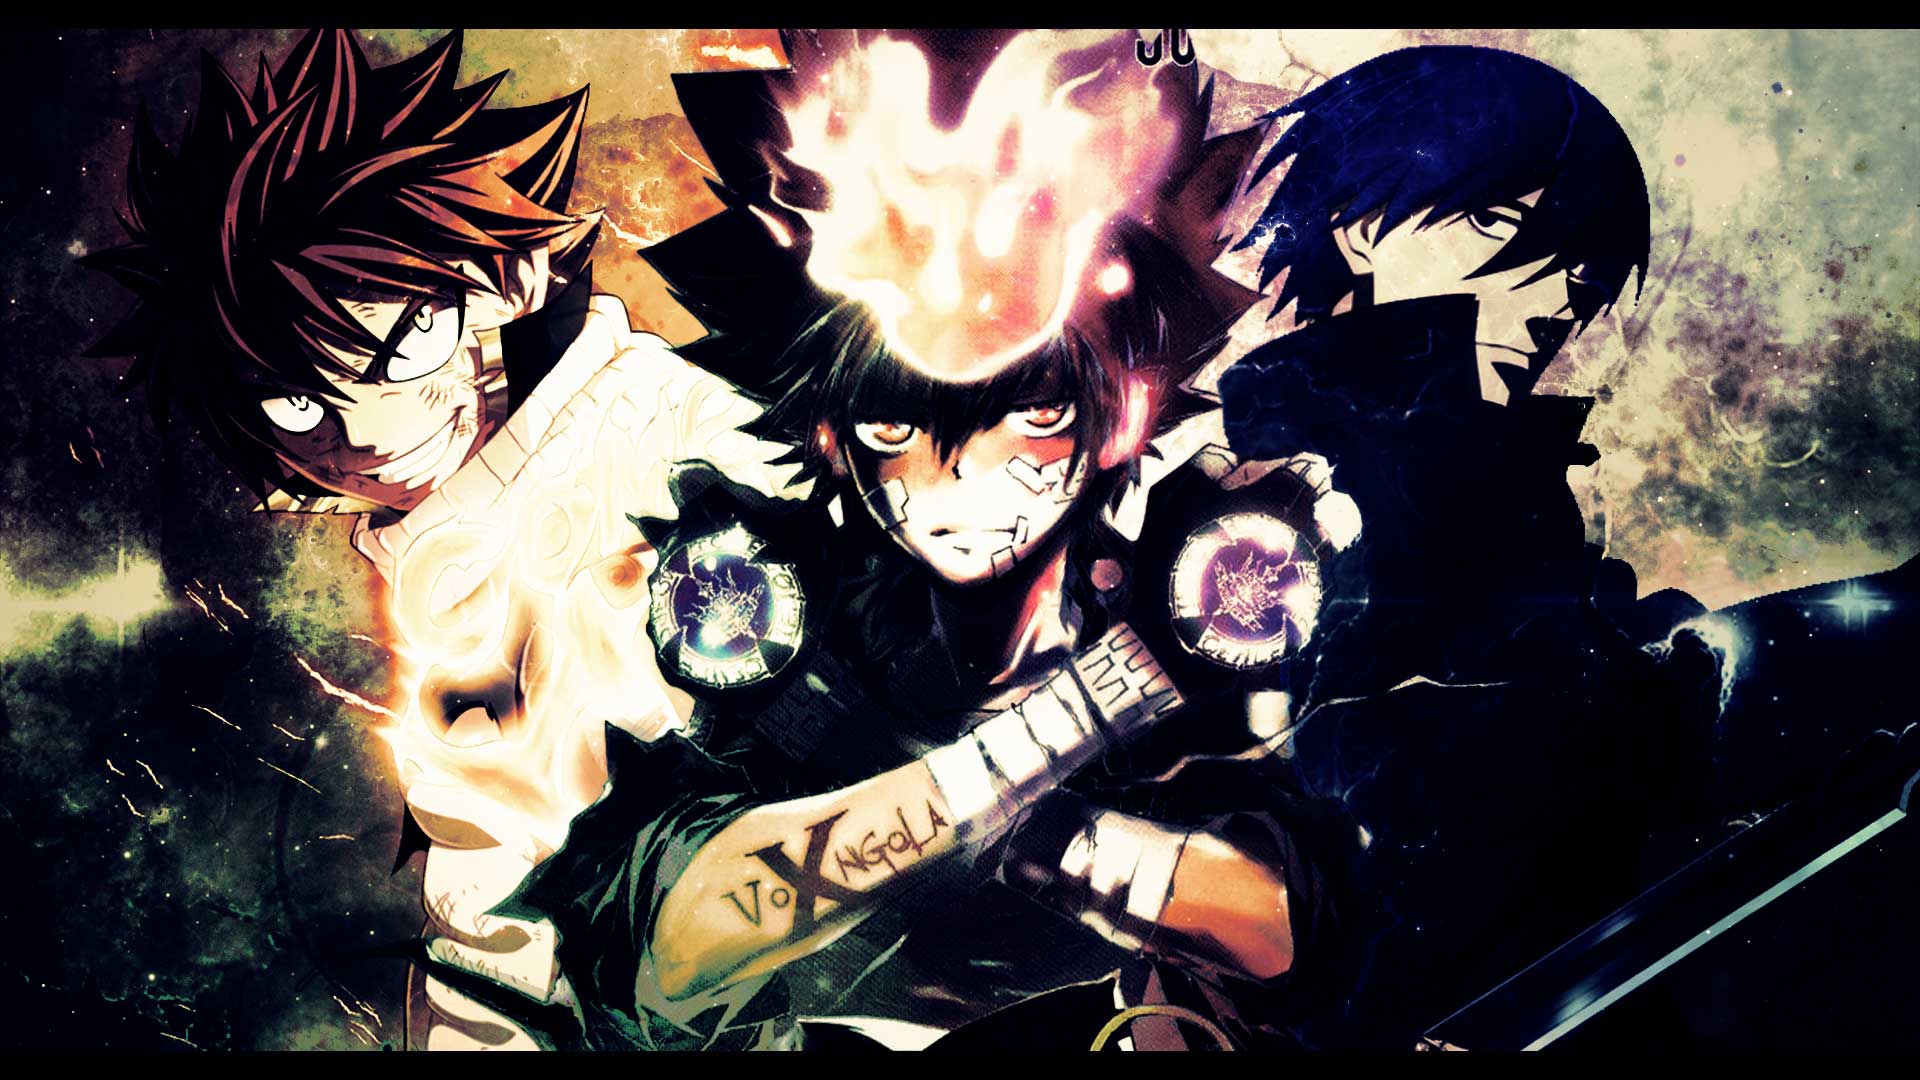 Fairy Tail Anime Wallpapers HD - Wallpaper Cave